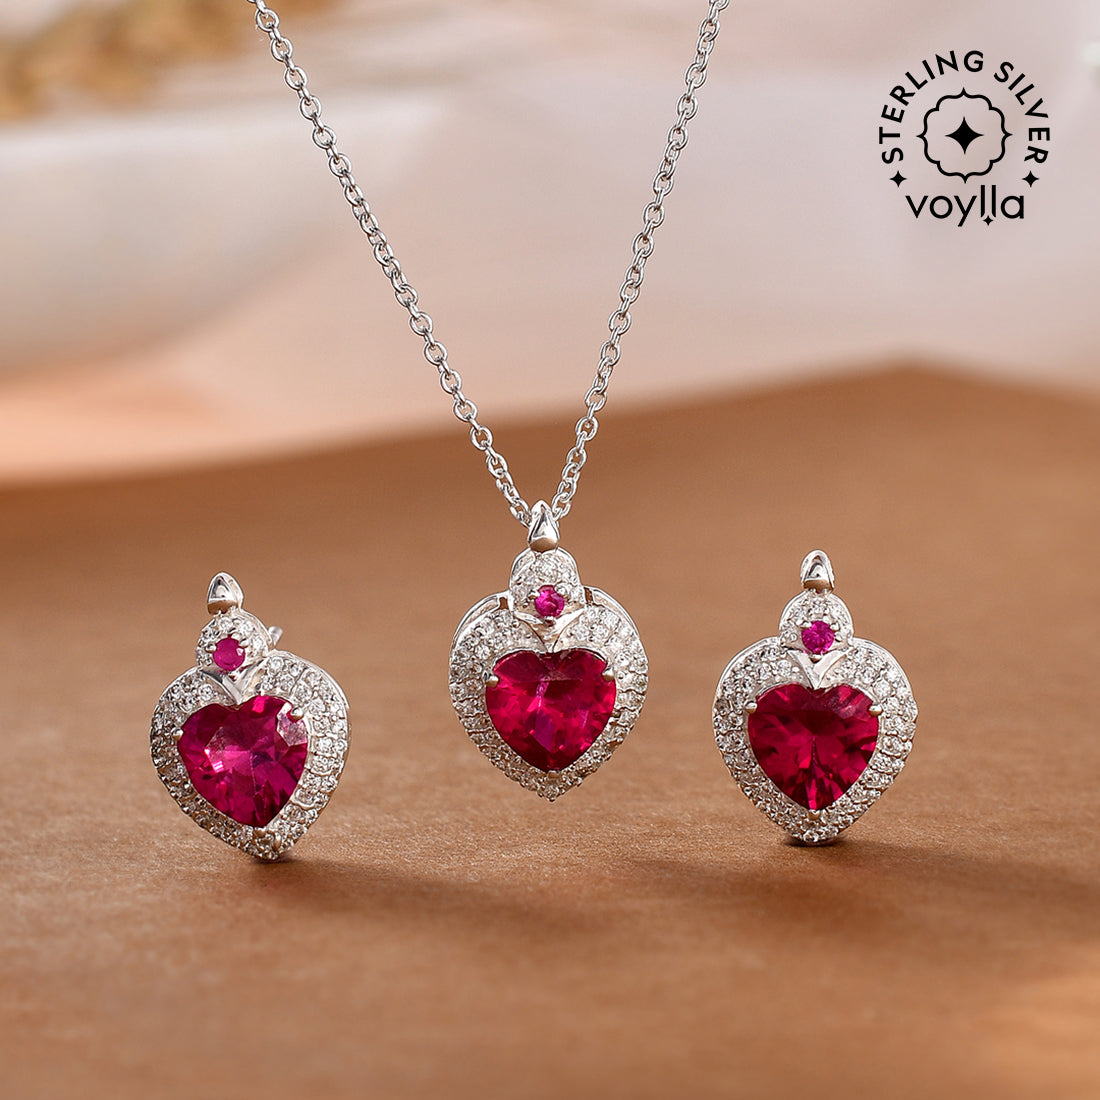 Women's Heart Shape Pink Ruby And Zirconia Embellished Sterling Silver Pendant Set - Voylla